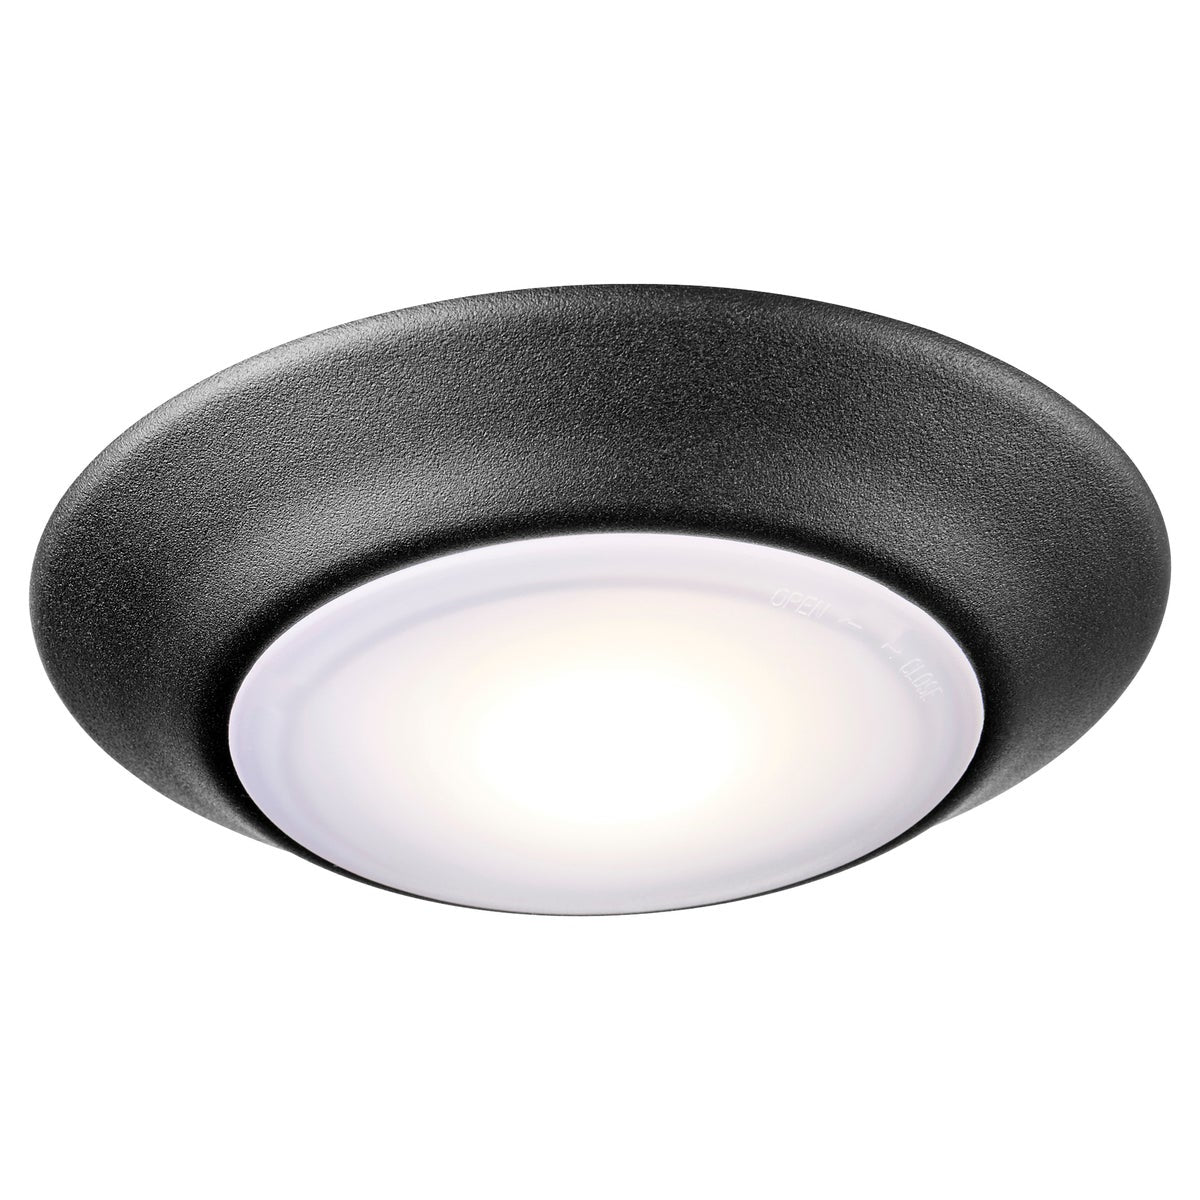 LED Disk Light by Quorum International - A close-up of a versatile, energy-efficient LED light with a diffuser for even light distribution. Mounts to existing junction boxes. 12W, 730 lumens, 3000K color temperature. Dimmable, UL Listed. 6"W x 1"H. 2-year warranty.